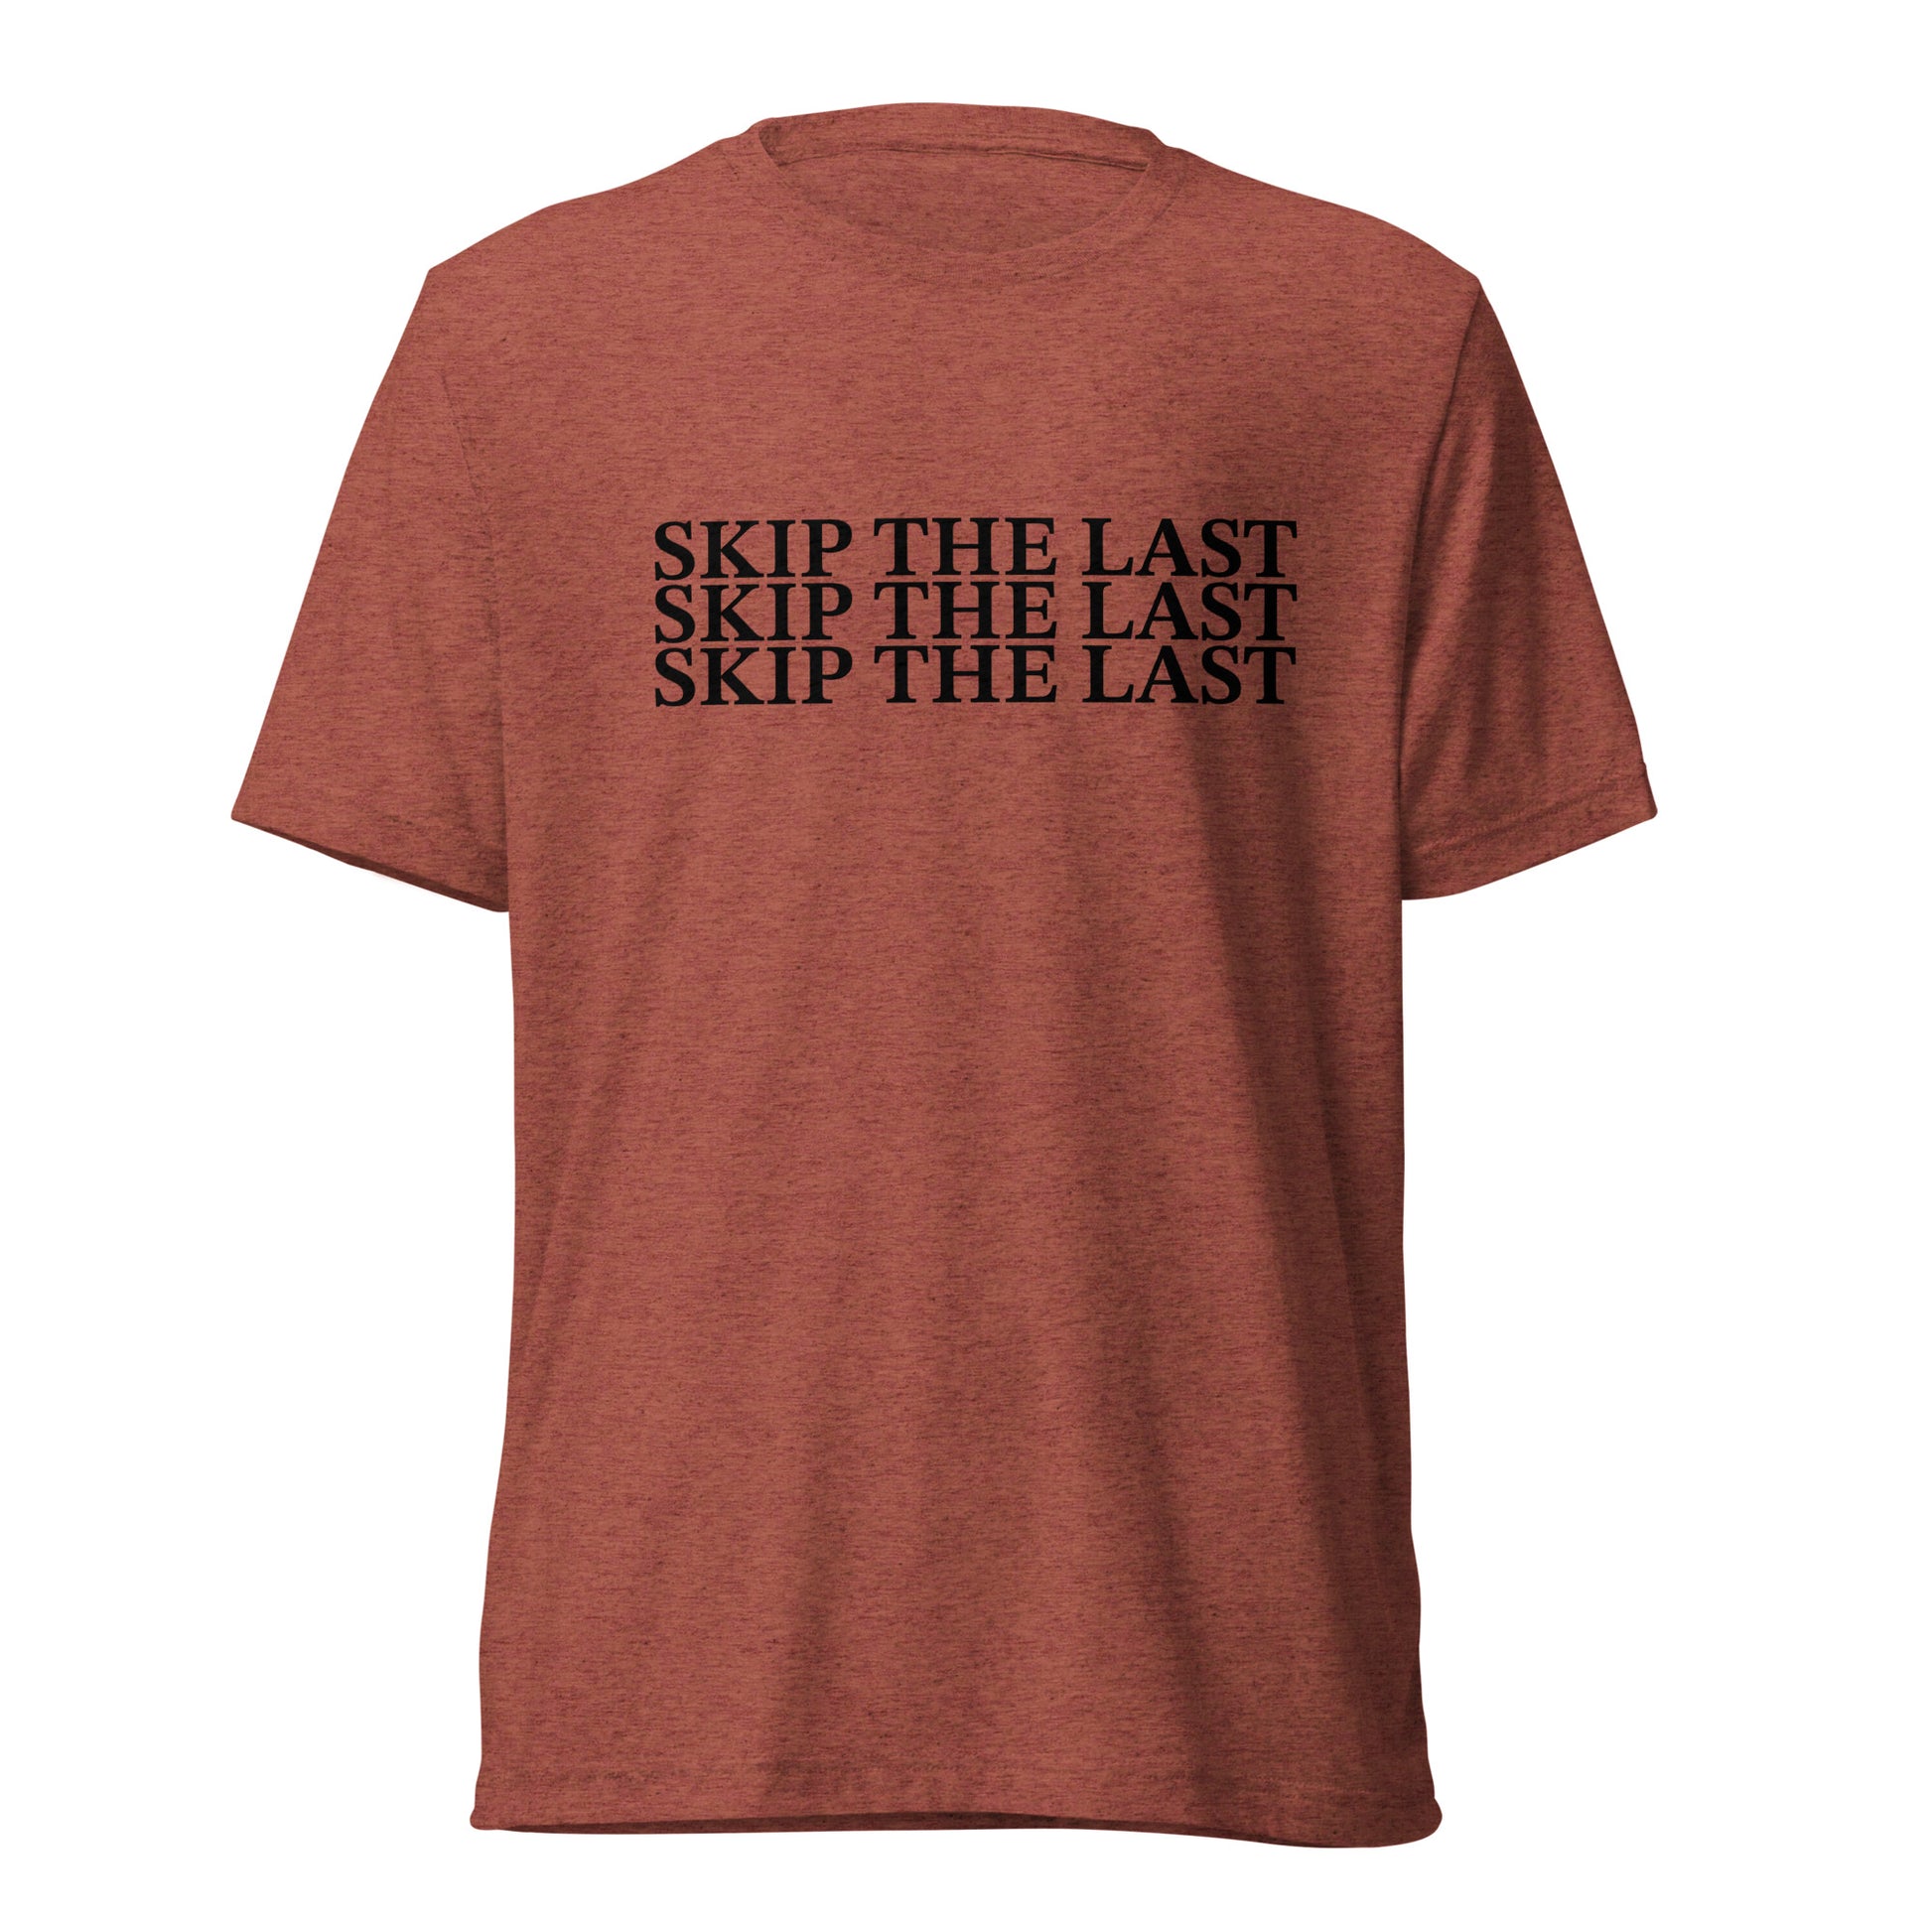 Two More Skip The Last "Skip the Last x3" clay unisex tri-blend t-shirt. Front view